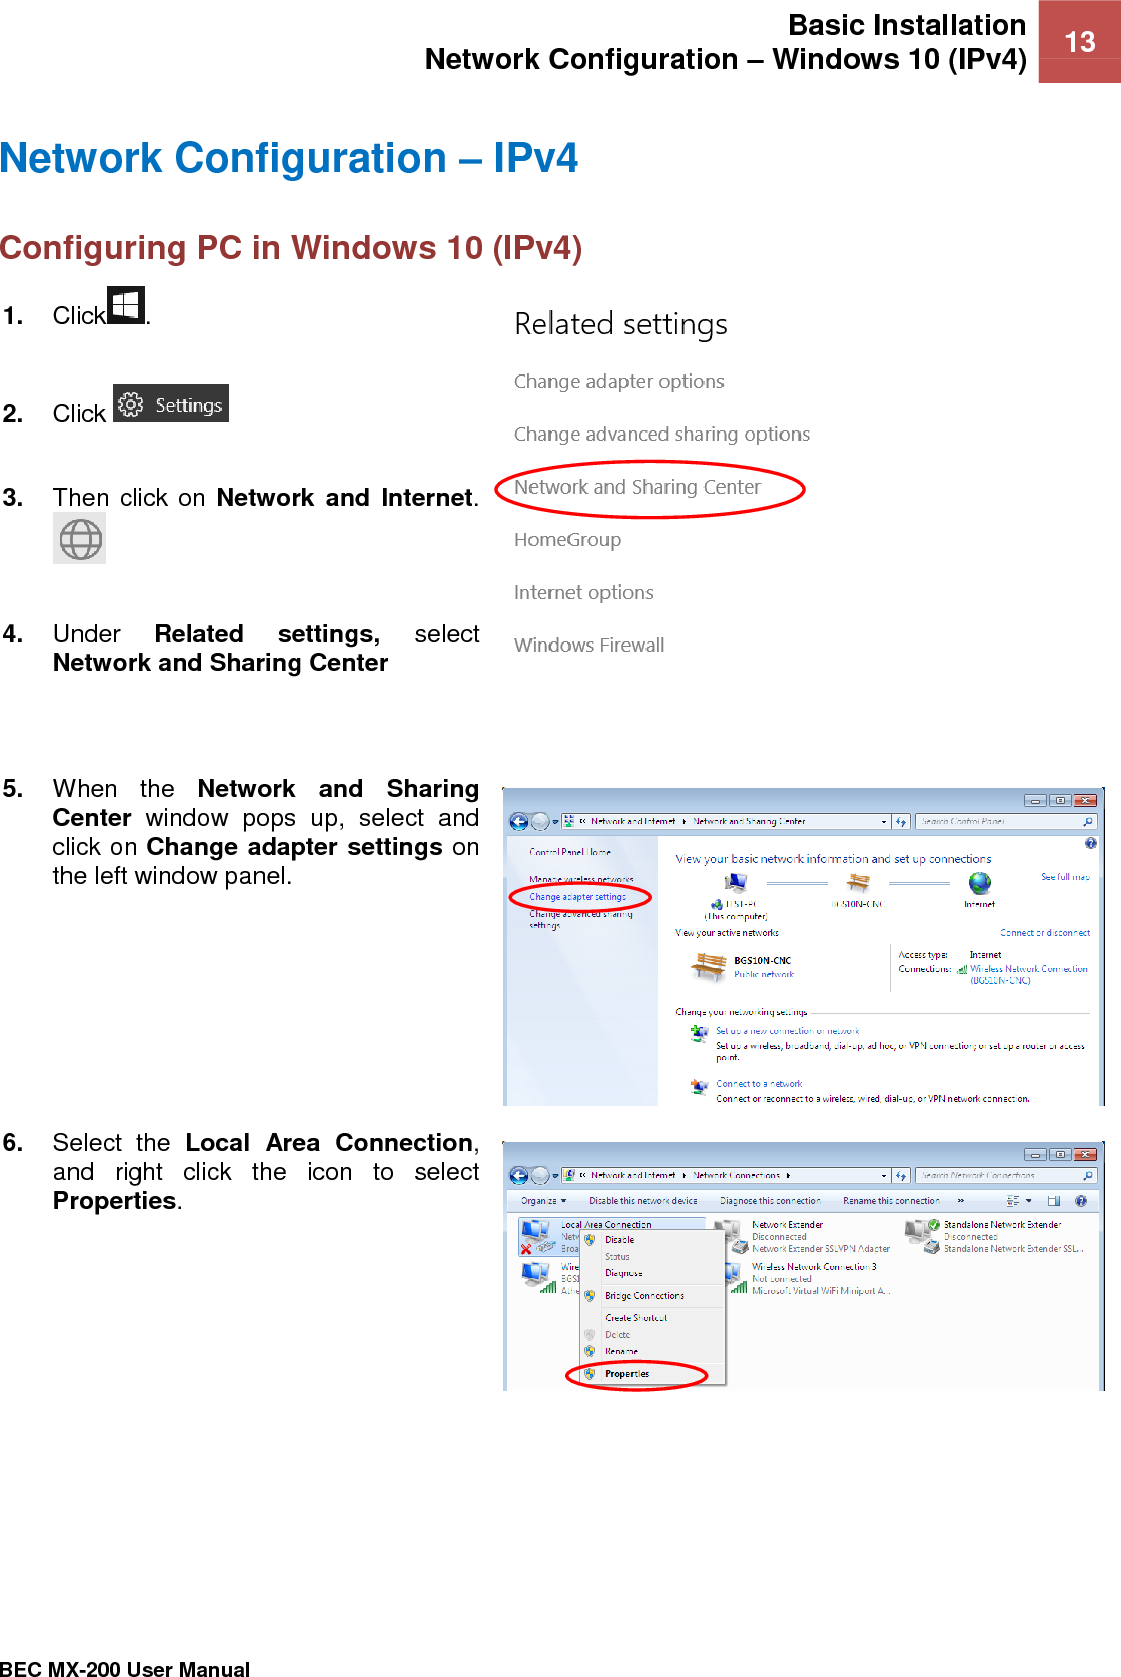 Basic Installation Network Configuration – Windows 10 (IPv4) 13   BEC MX-200 User Manual  Network Configuration – IPv4 Configuring PC in Windows 10 (IPv4)    1. Click .  2. Click    3. Then click on Network  and Internet.   4. Under  Related  settings,  select Network and Sharing Center    5. When  the  Network  and  Sharing Center  window  pops  up,  select  and click on Change adapter settings on the left window panel.  6. Select  the  Local  Area  Connection, and  right  click  the  icon  to  select Properties.  